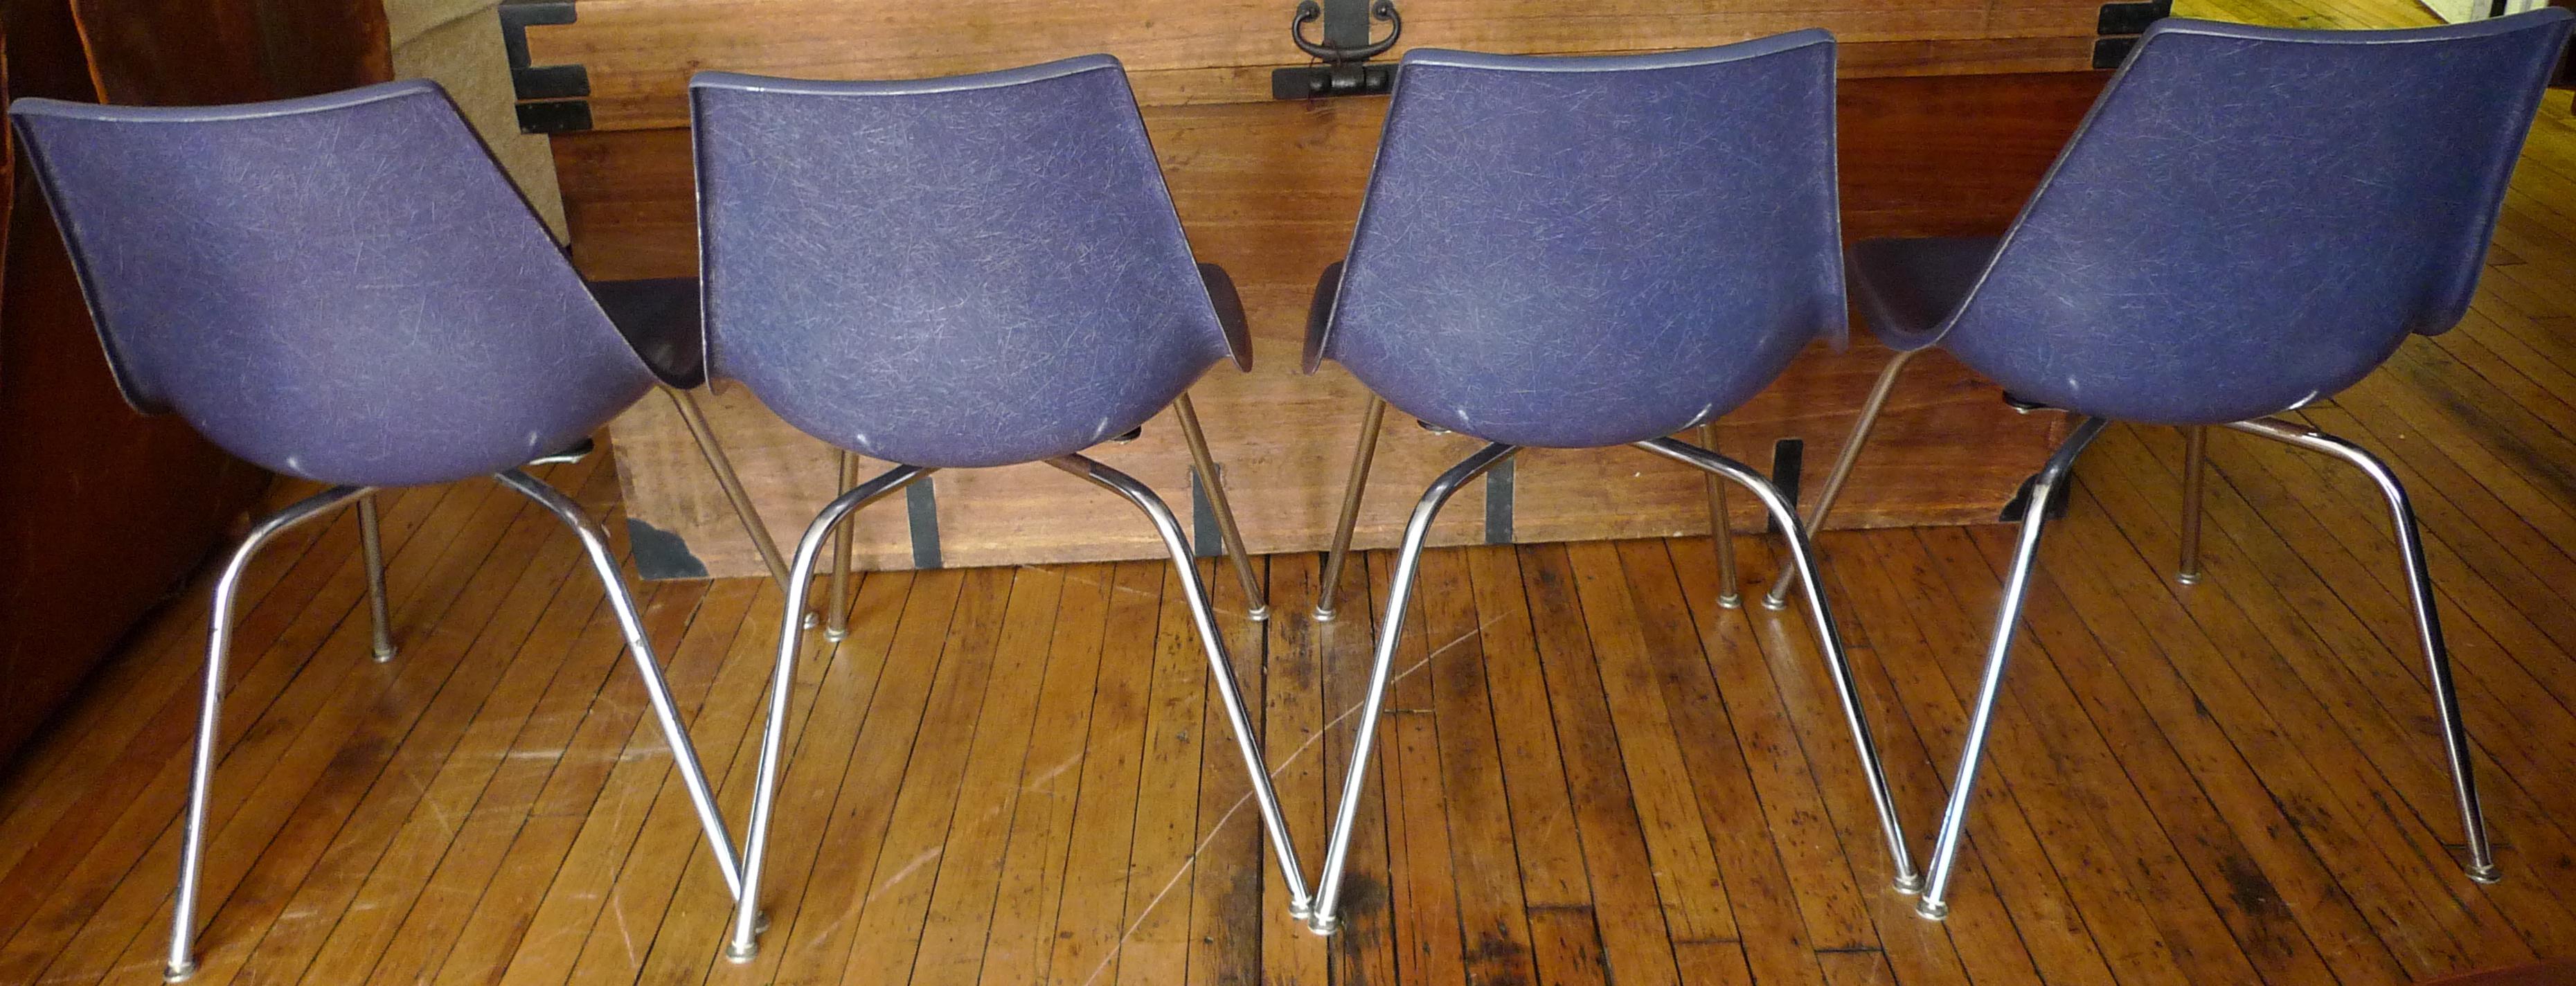 Dining Chairs of Blue Fiberglass with Chrome Frames from Kreuger, Set of 4 For Sale 1